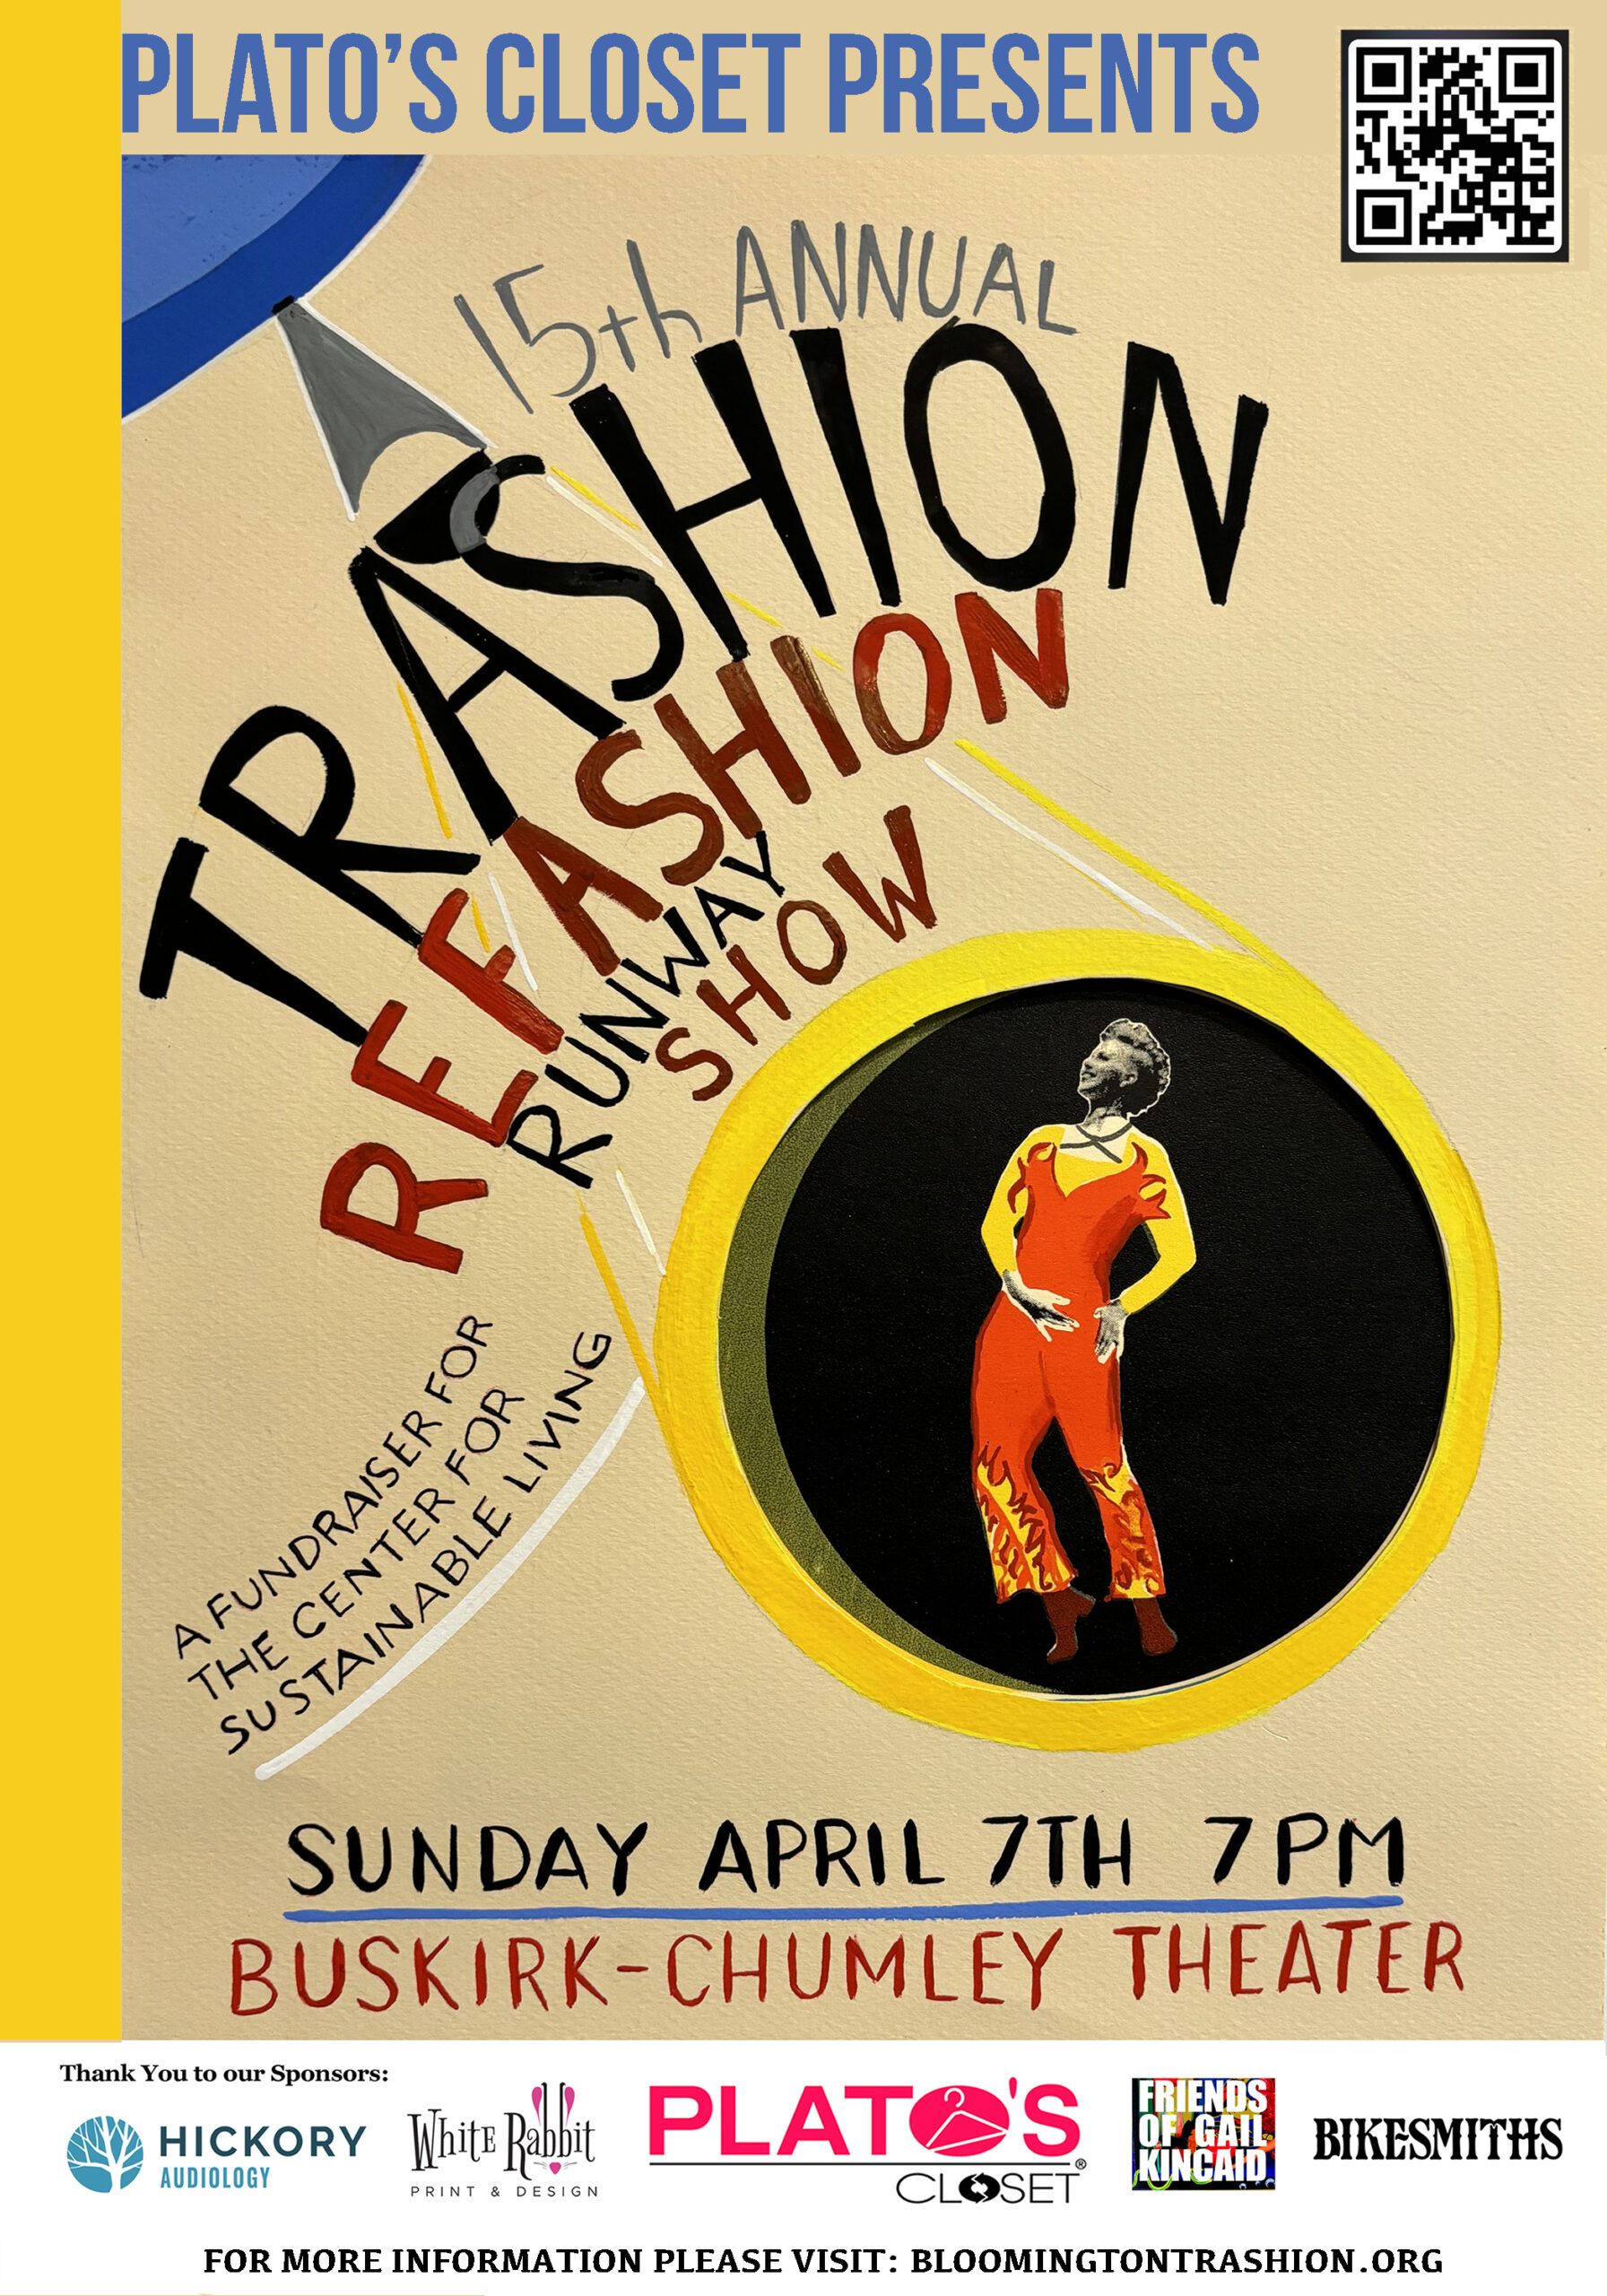 Promotional poster for Plato's Closet Presents the 15th Annual Trashion Refashion Runway Show, featuring a stylized individual in red attire, as a fundraiser for The Center for Sustainable Living.